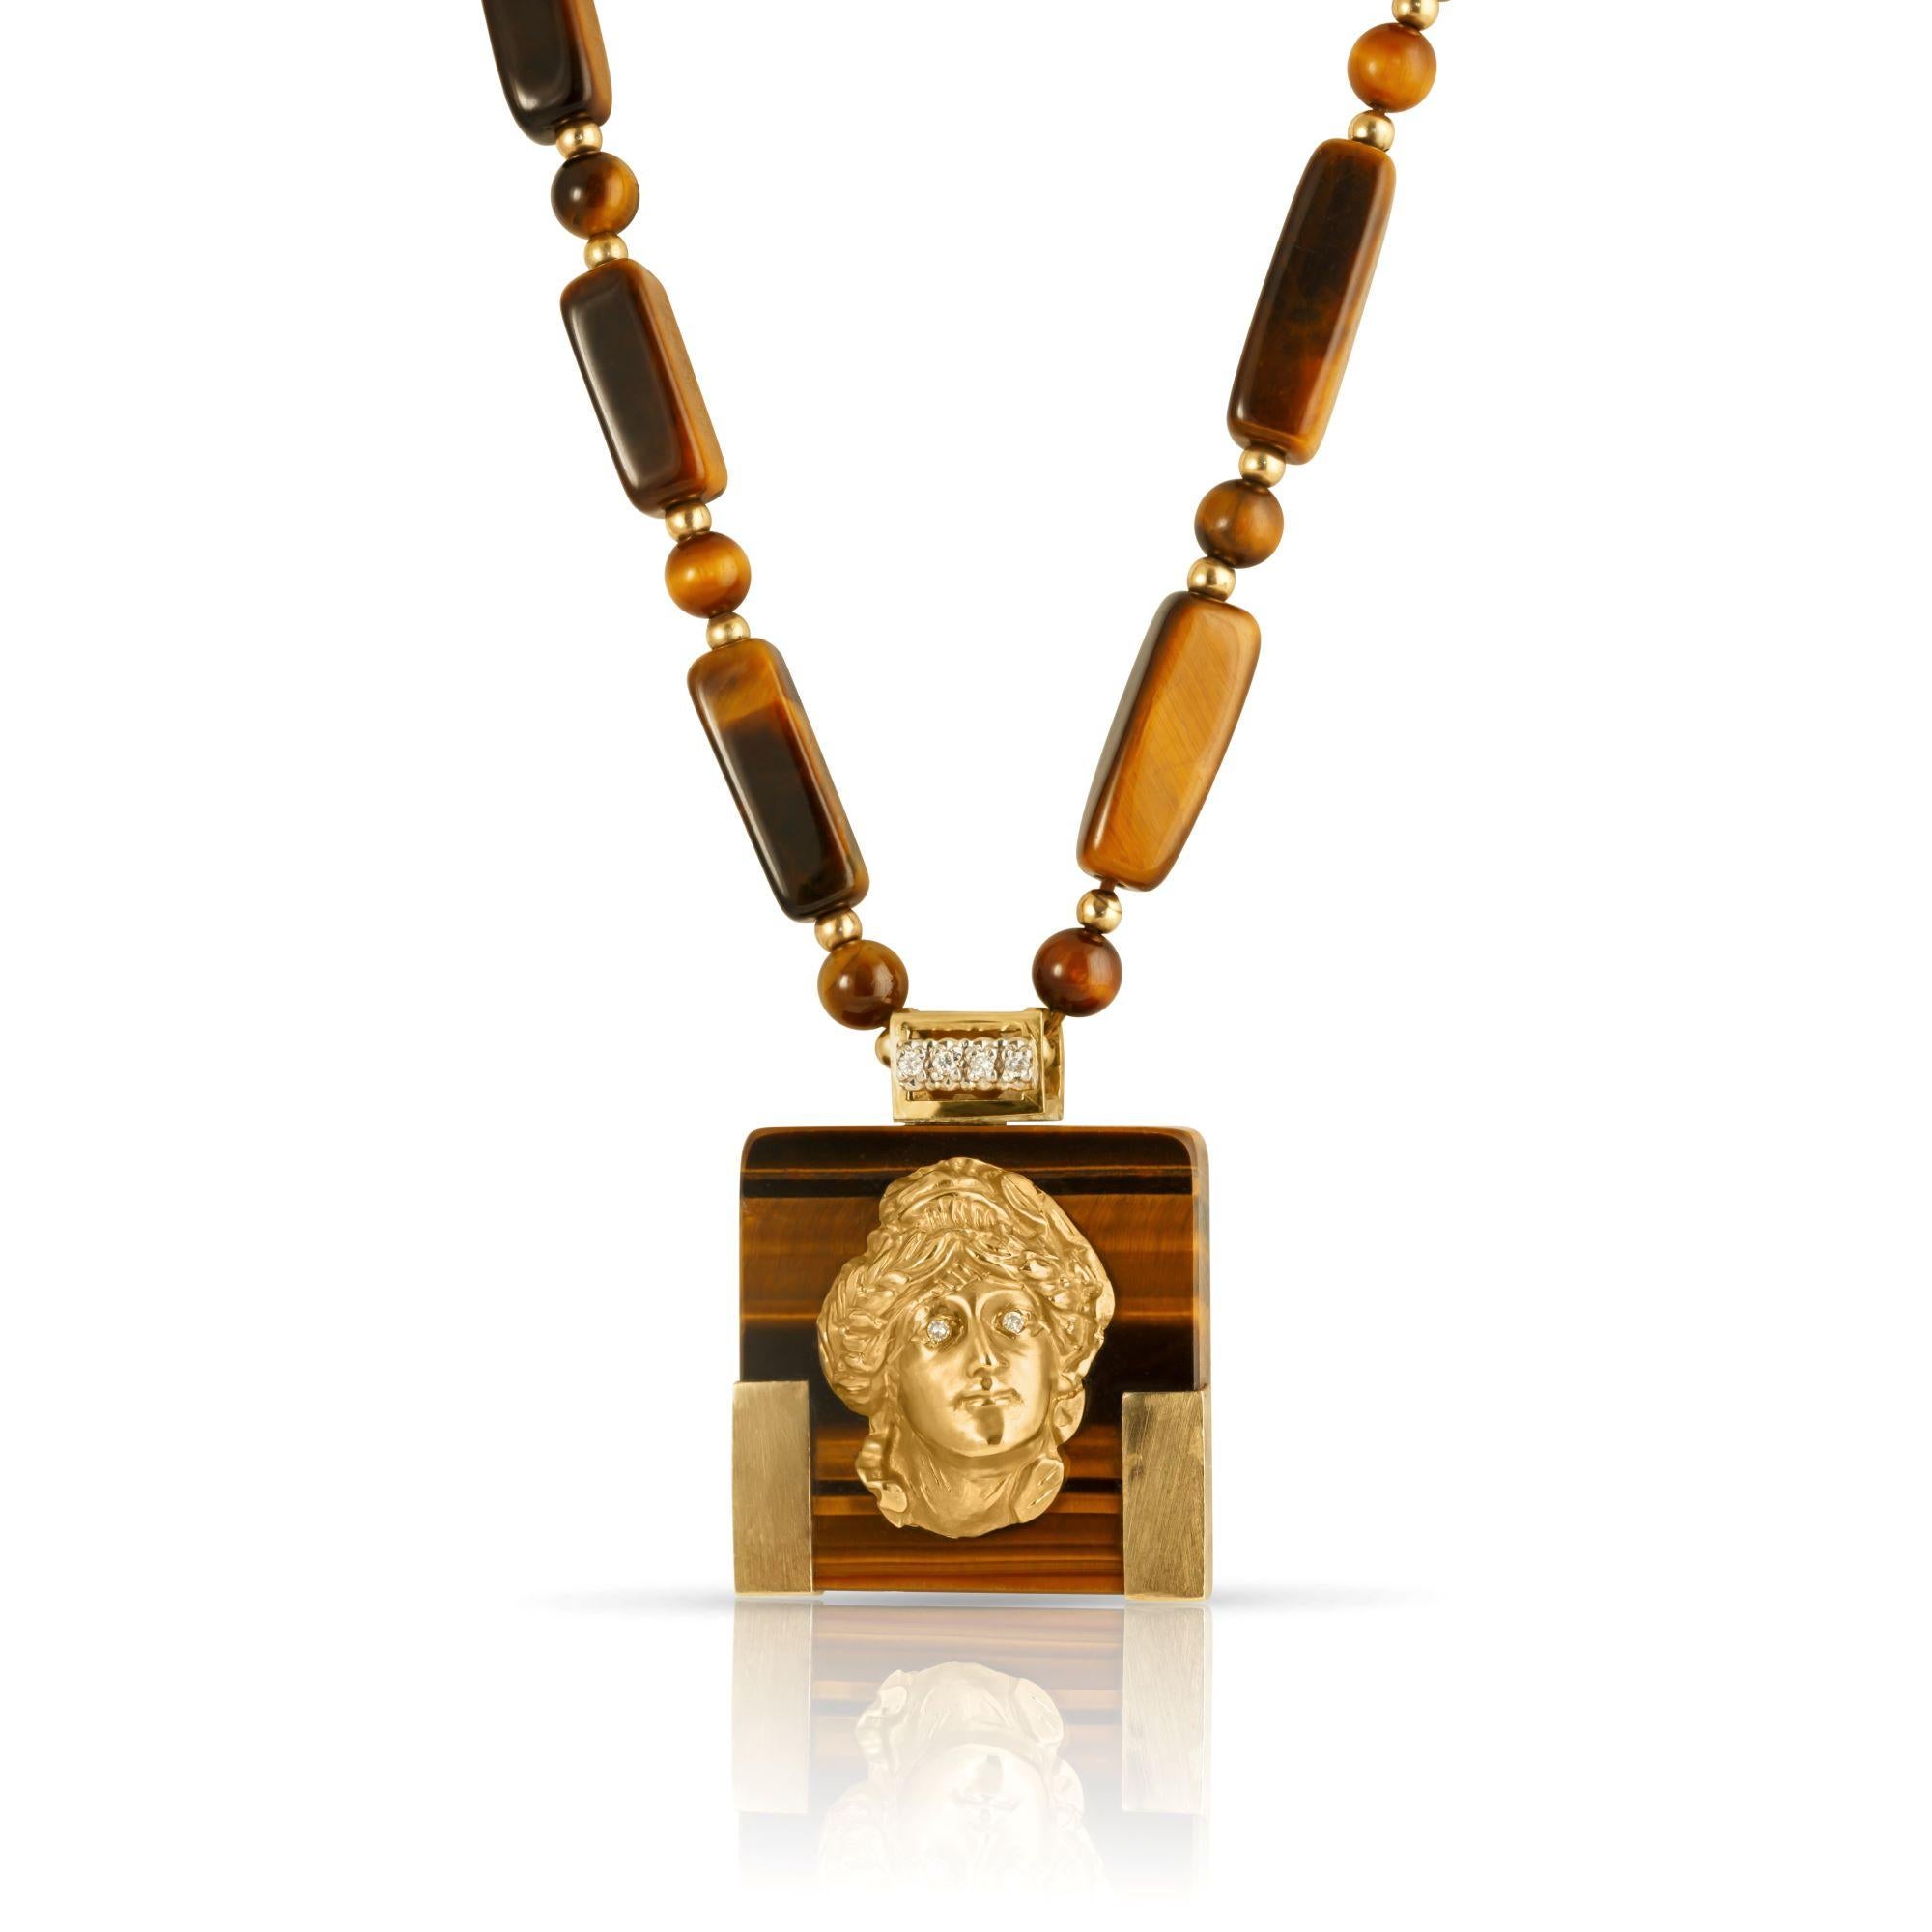 A magnificent and substantial tiger eye necklace with a dreamy portrait pendant from the heart of the 1980s. Long and significant, the necklace is composed of 23 multi-dimensional tiger eye stones in irregular rectangular shapes, intersected by